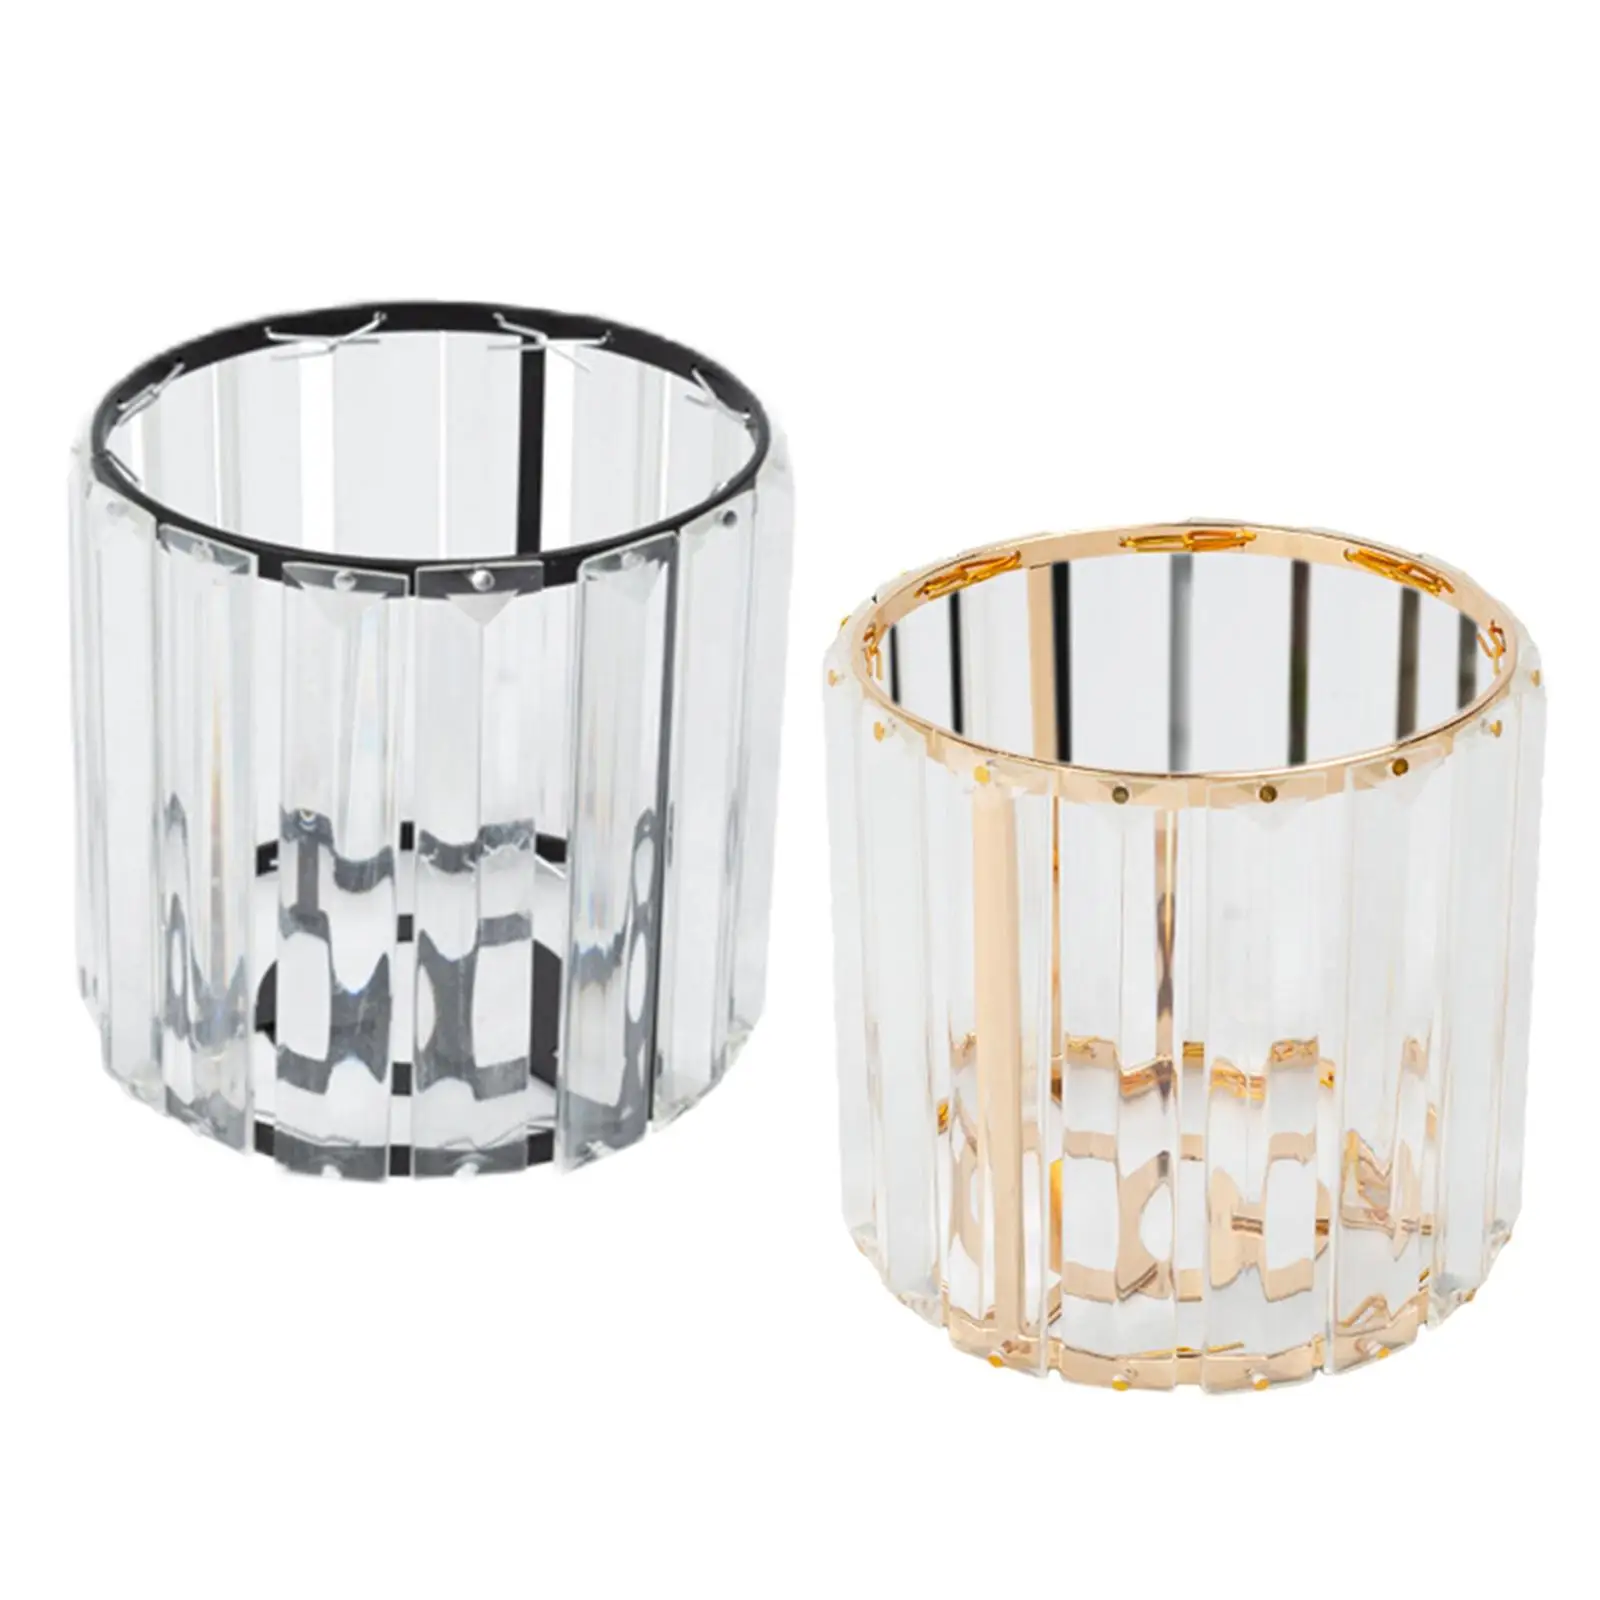 Clear Crystal Shade Cover Replacements, Cylinder Crystal Lamp Shade Replacement